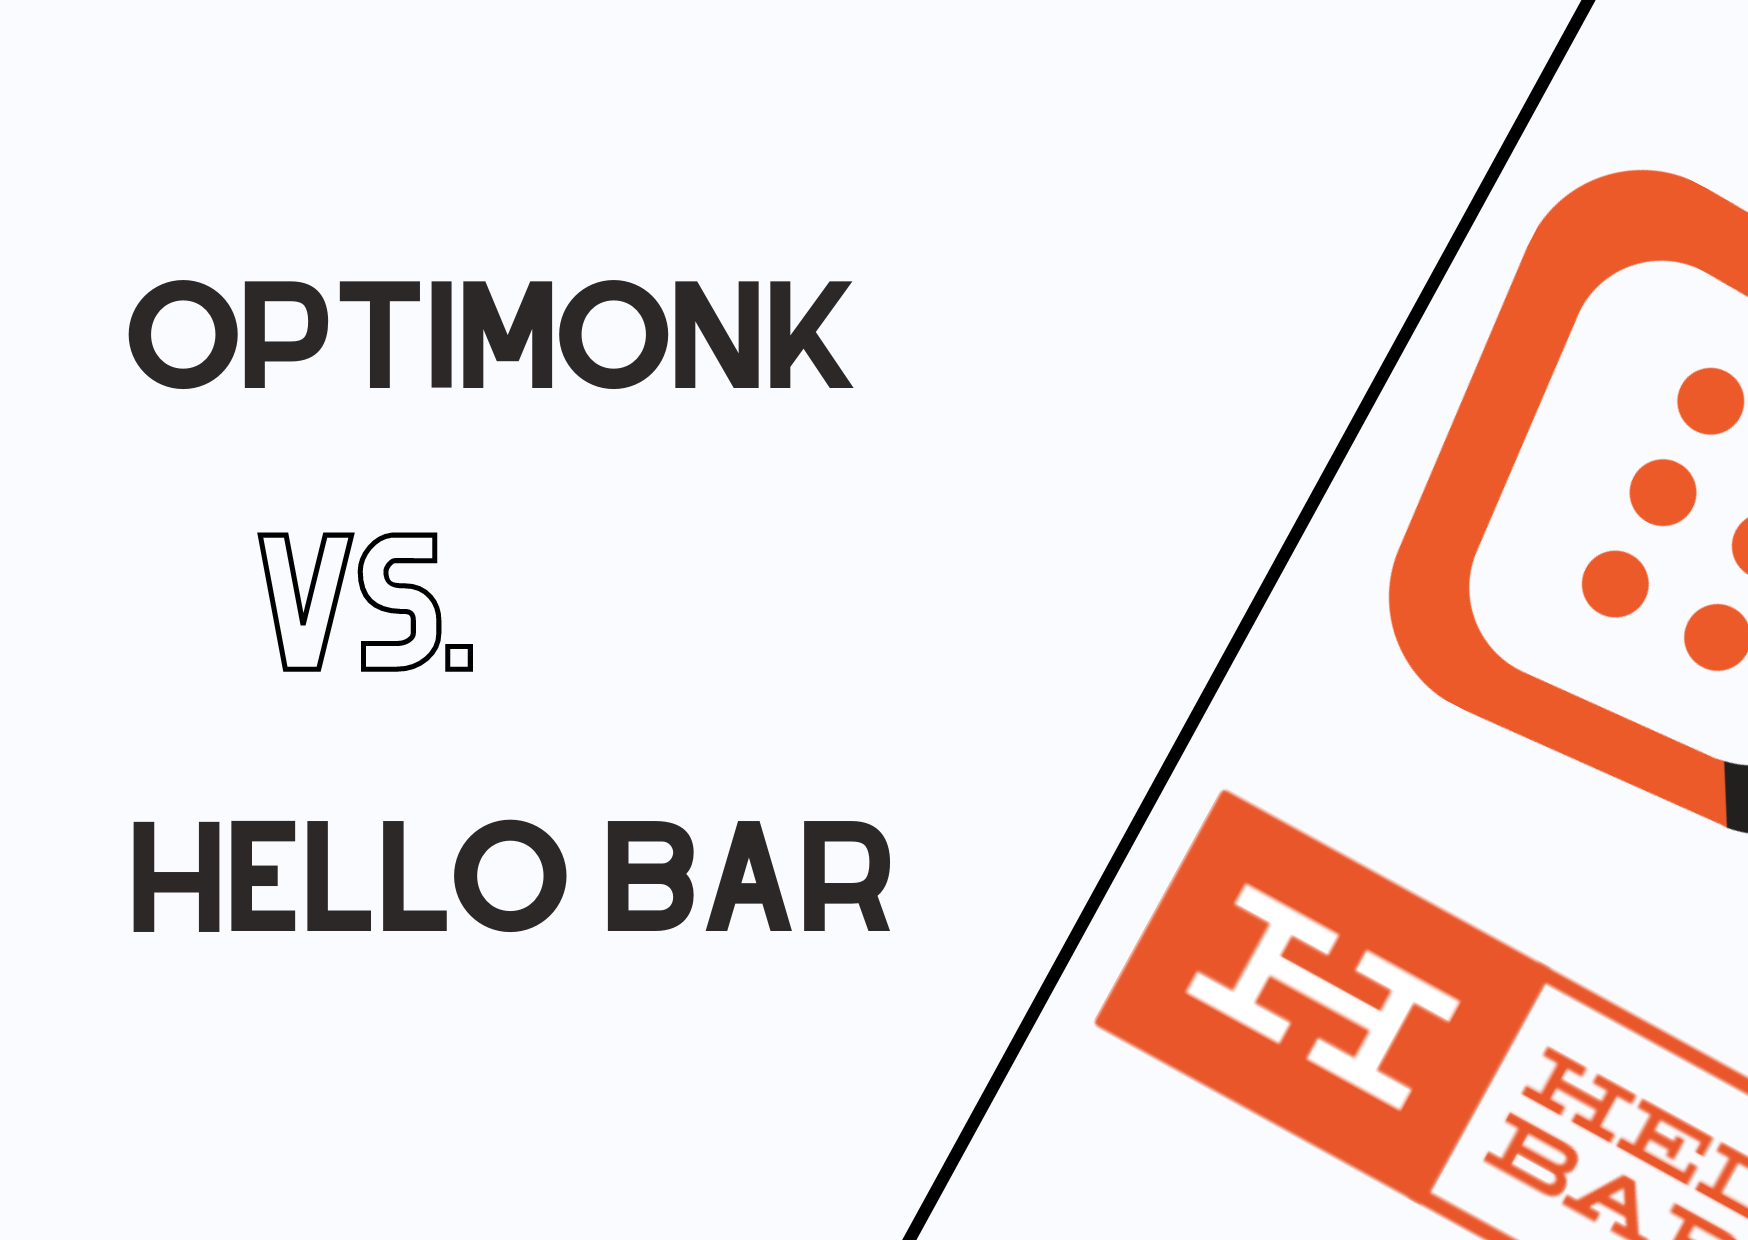 OptiMonk and Hello Bar banner with the logos and the title